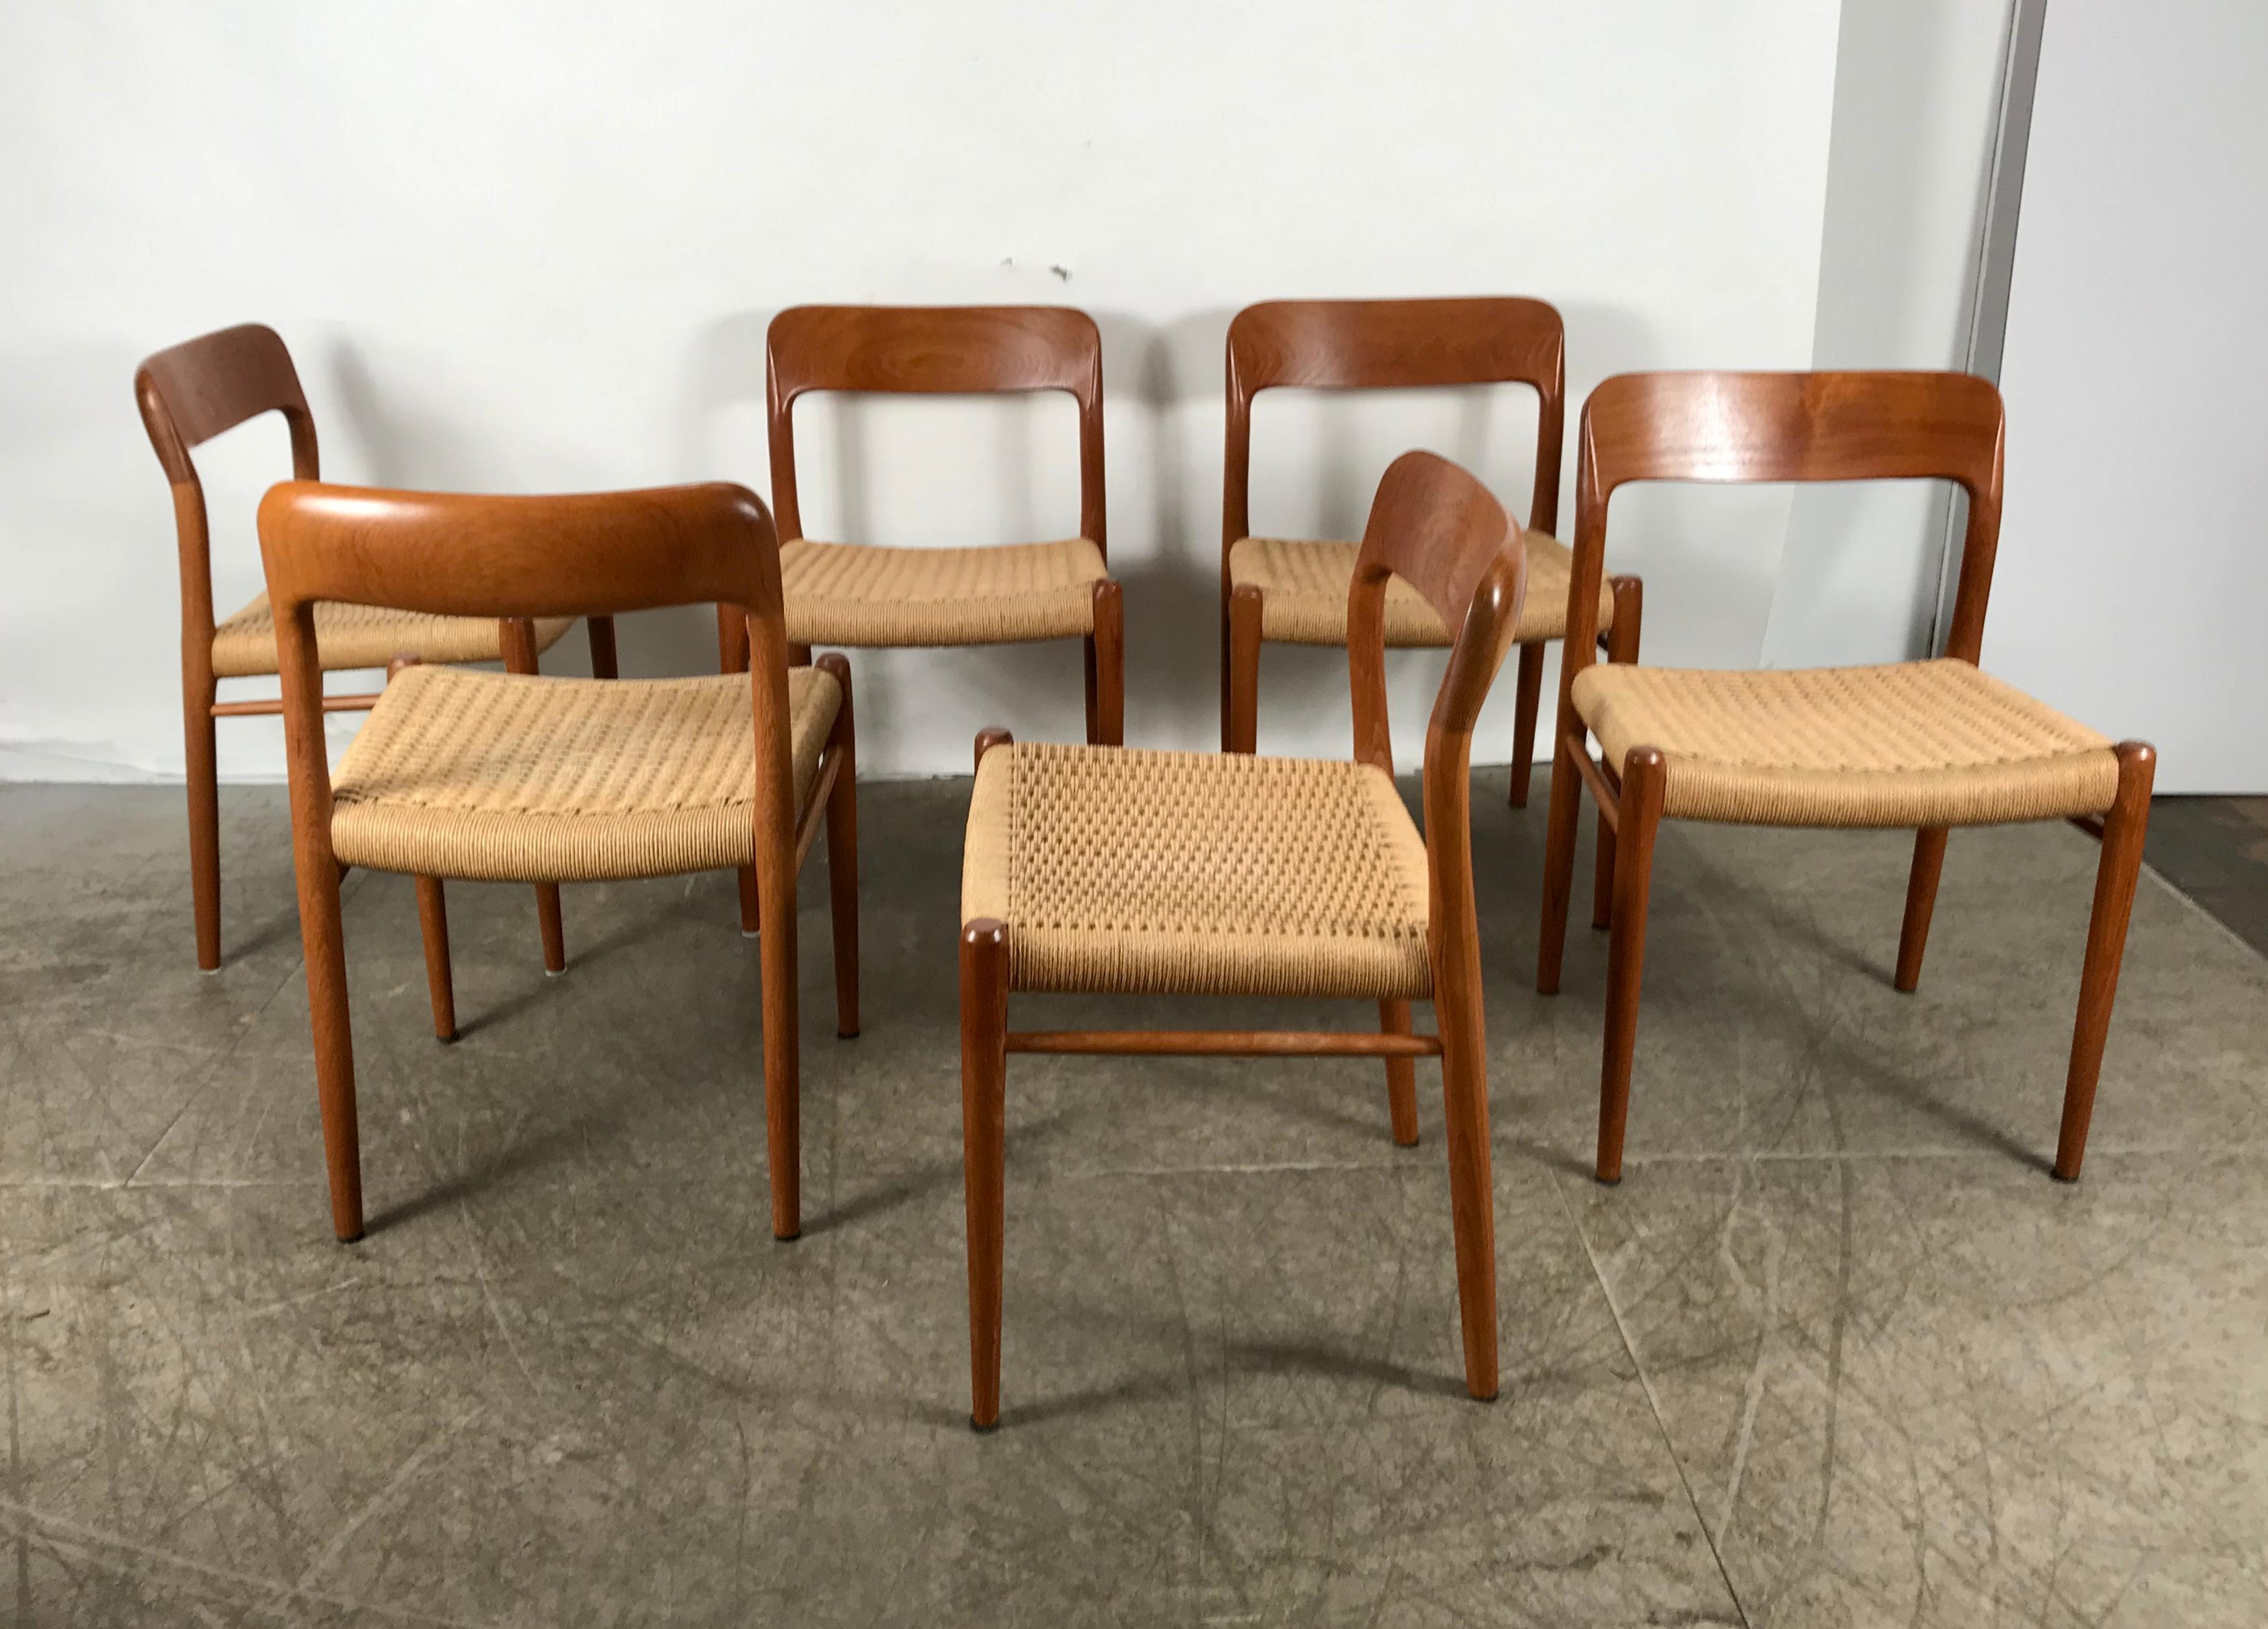 20th Century Classic Set 6 Teak and Cane Dining Chairs, Niels Moller Model 75, Denmark